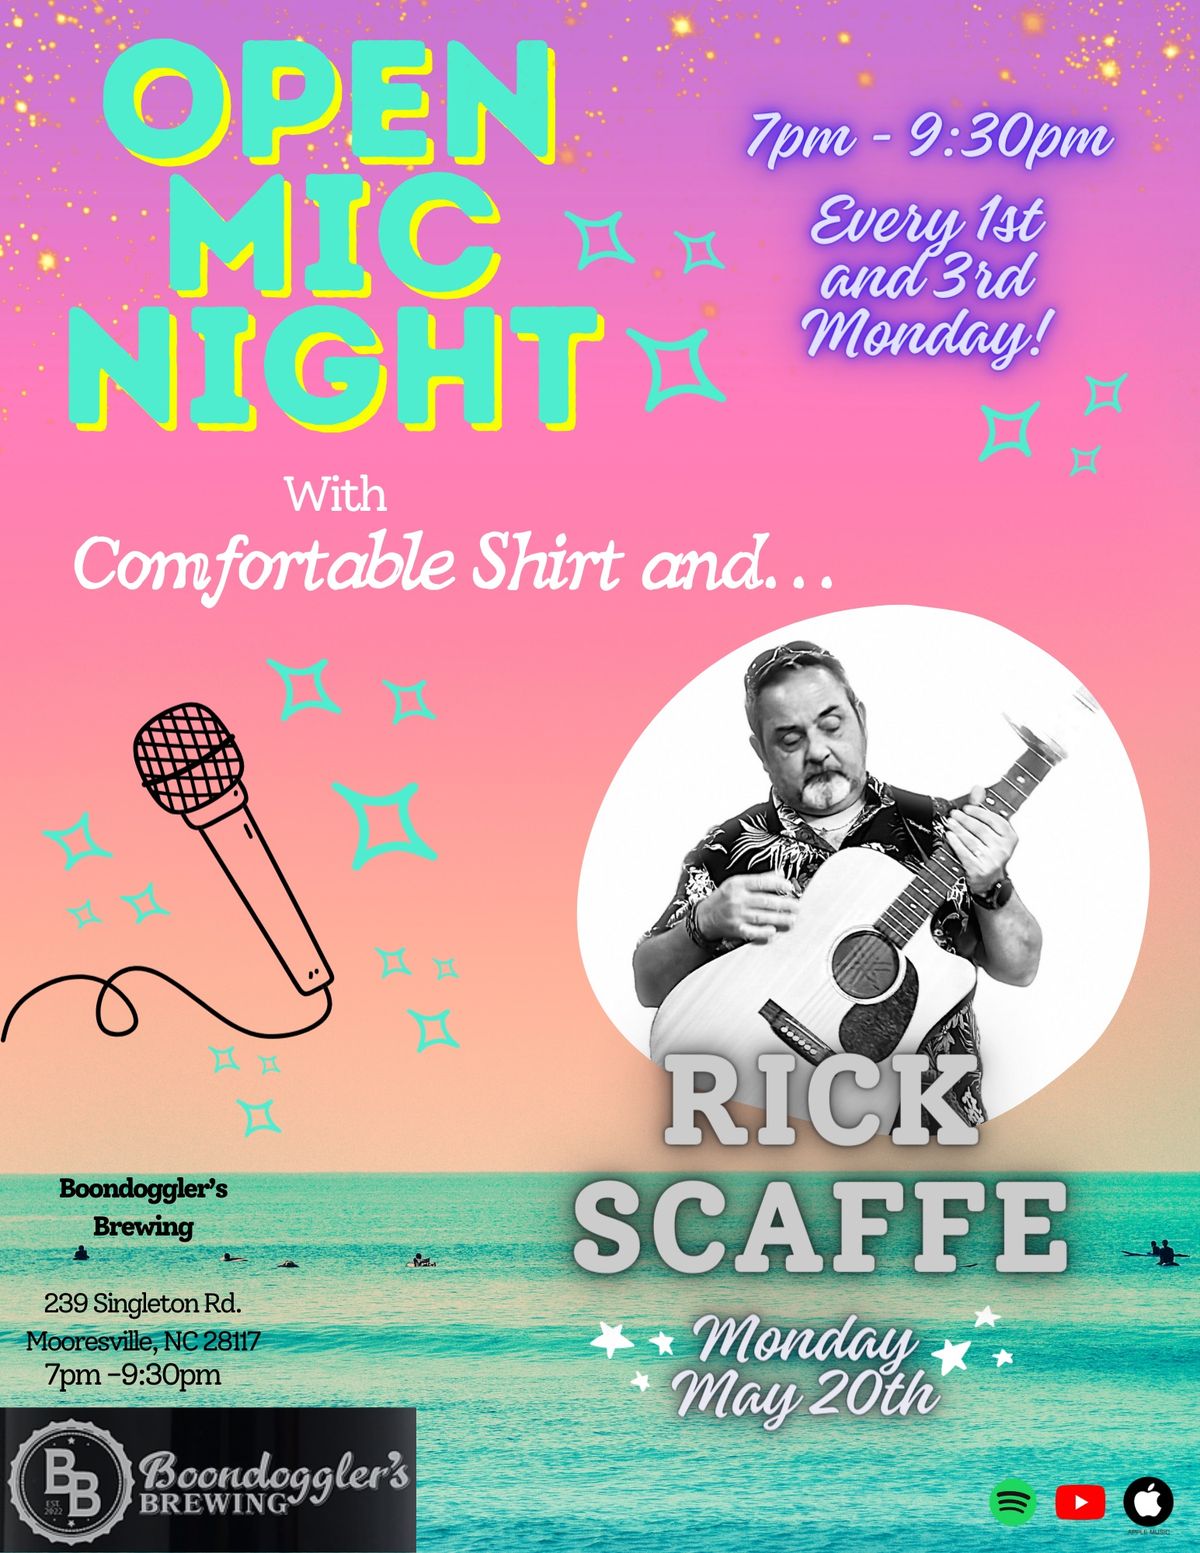 Open Mic with Rick Scaffe